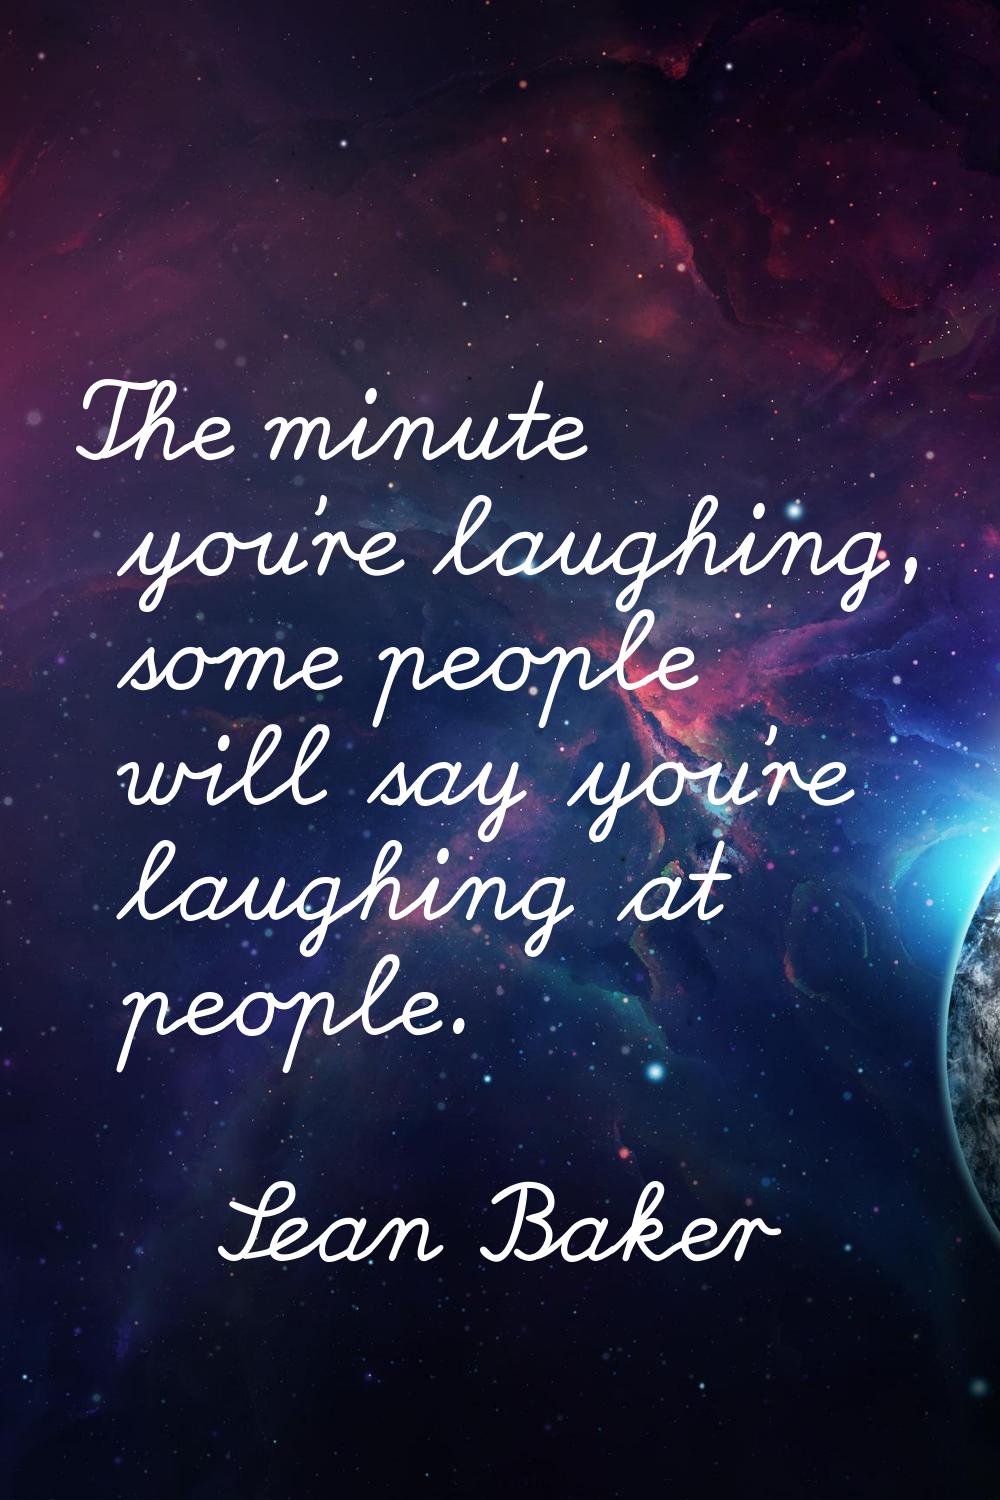 The minute you're laughing, some people will say you're laughing at people.